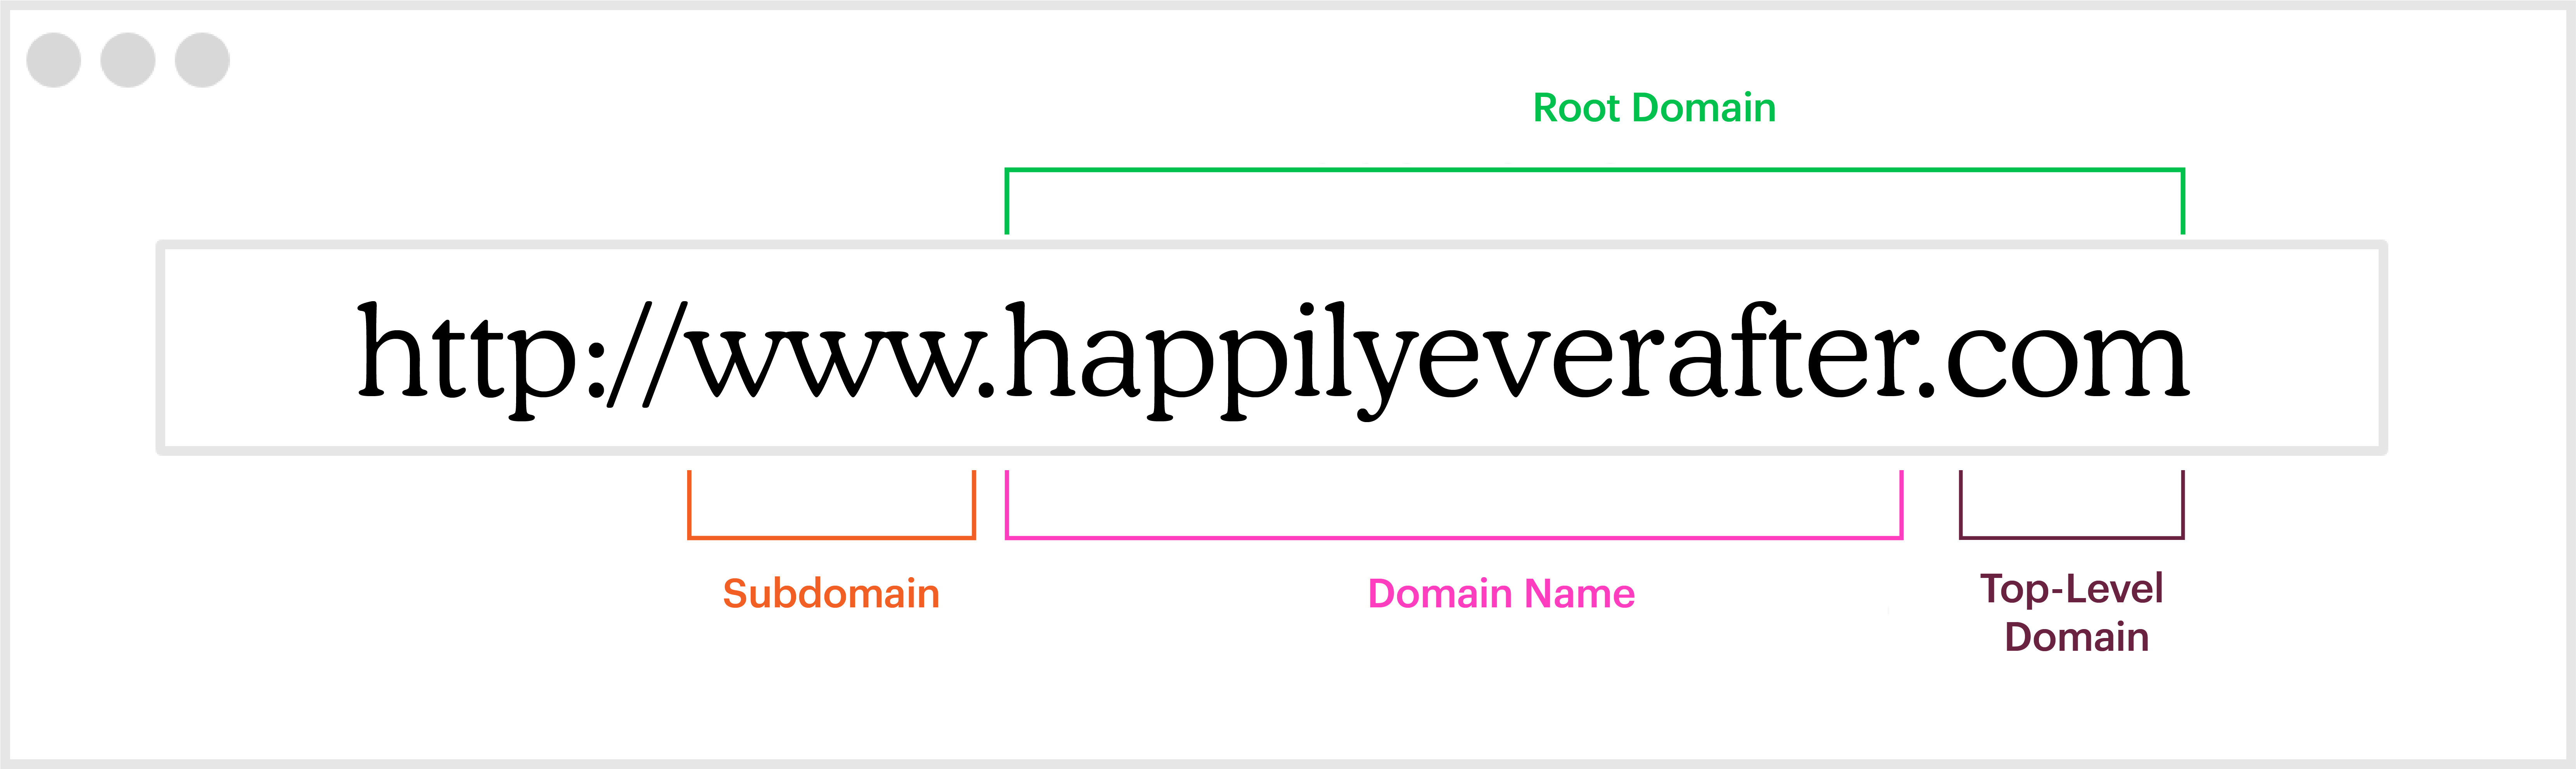 Parts of a domain name diagram. For the web address www.happillyeverafter.com, 'www' is an optional subdomain, 'happilyeverafter' is the domain name, and '.com' is the domain extension or top-level domain (TLD). The domain name and TLD together form the root domain, happilyeverafter.com.